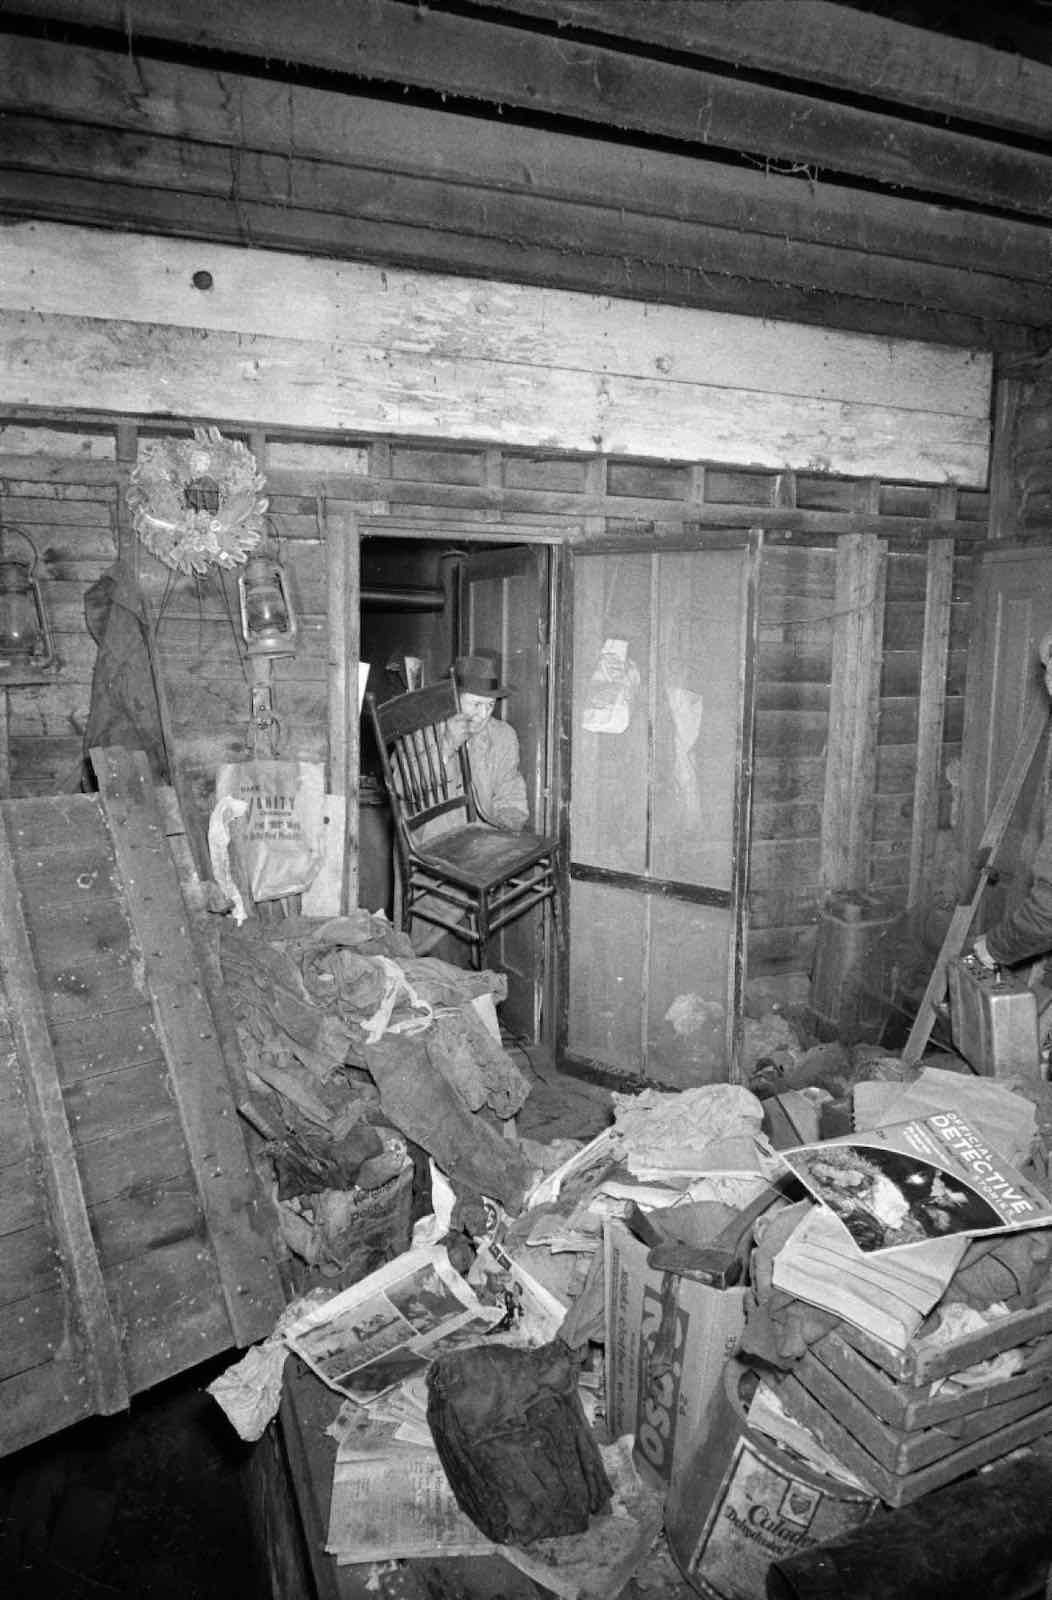 Ed Gein Pictures Of His Furniture